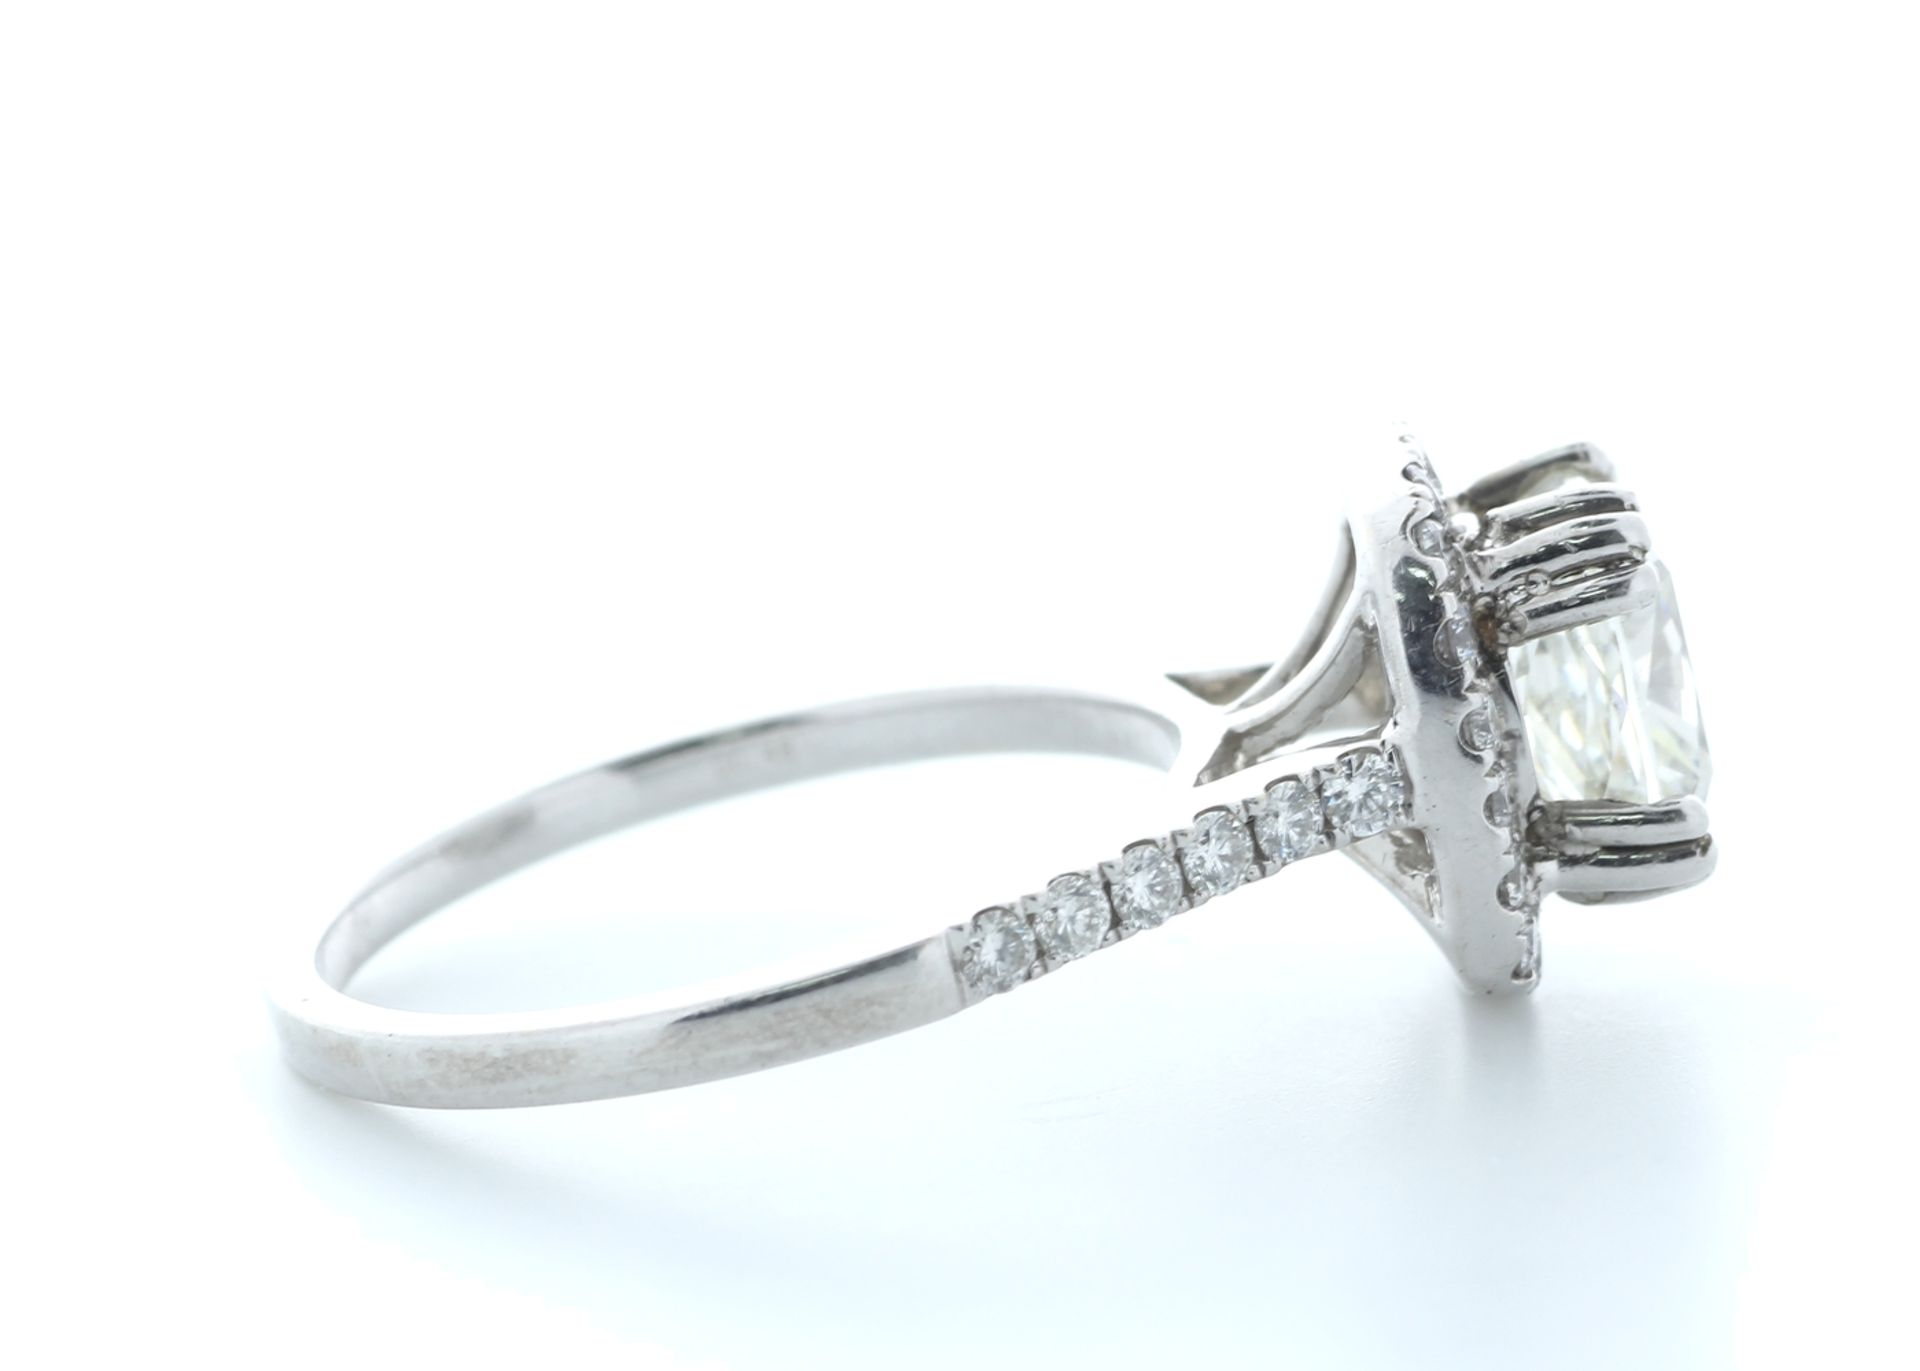 18ct White Gold Single Stone With Halo Setting Ring 2.63 (2.13) Carats - Valued by IDI £56,000. - Image 4 of 5